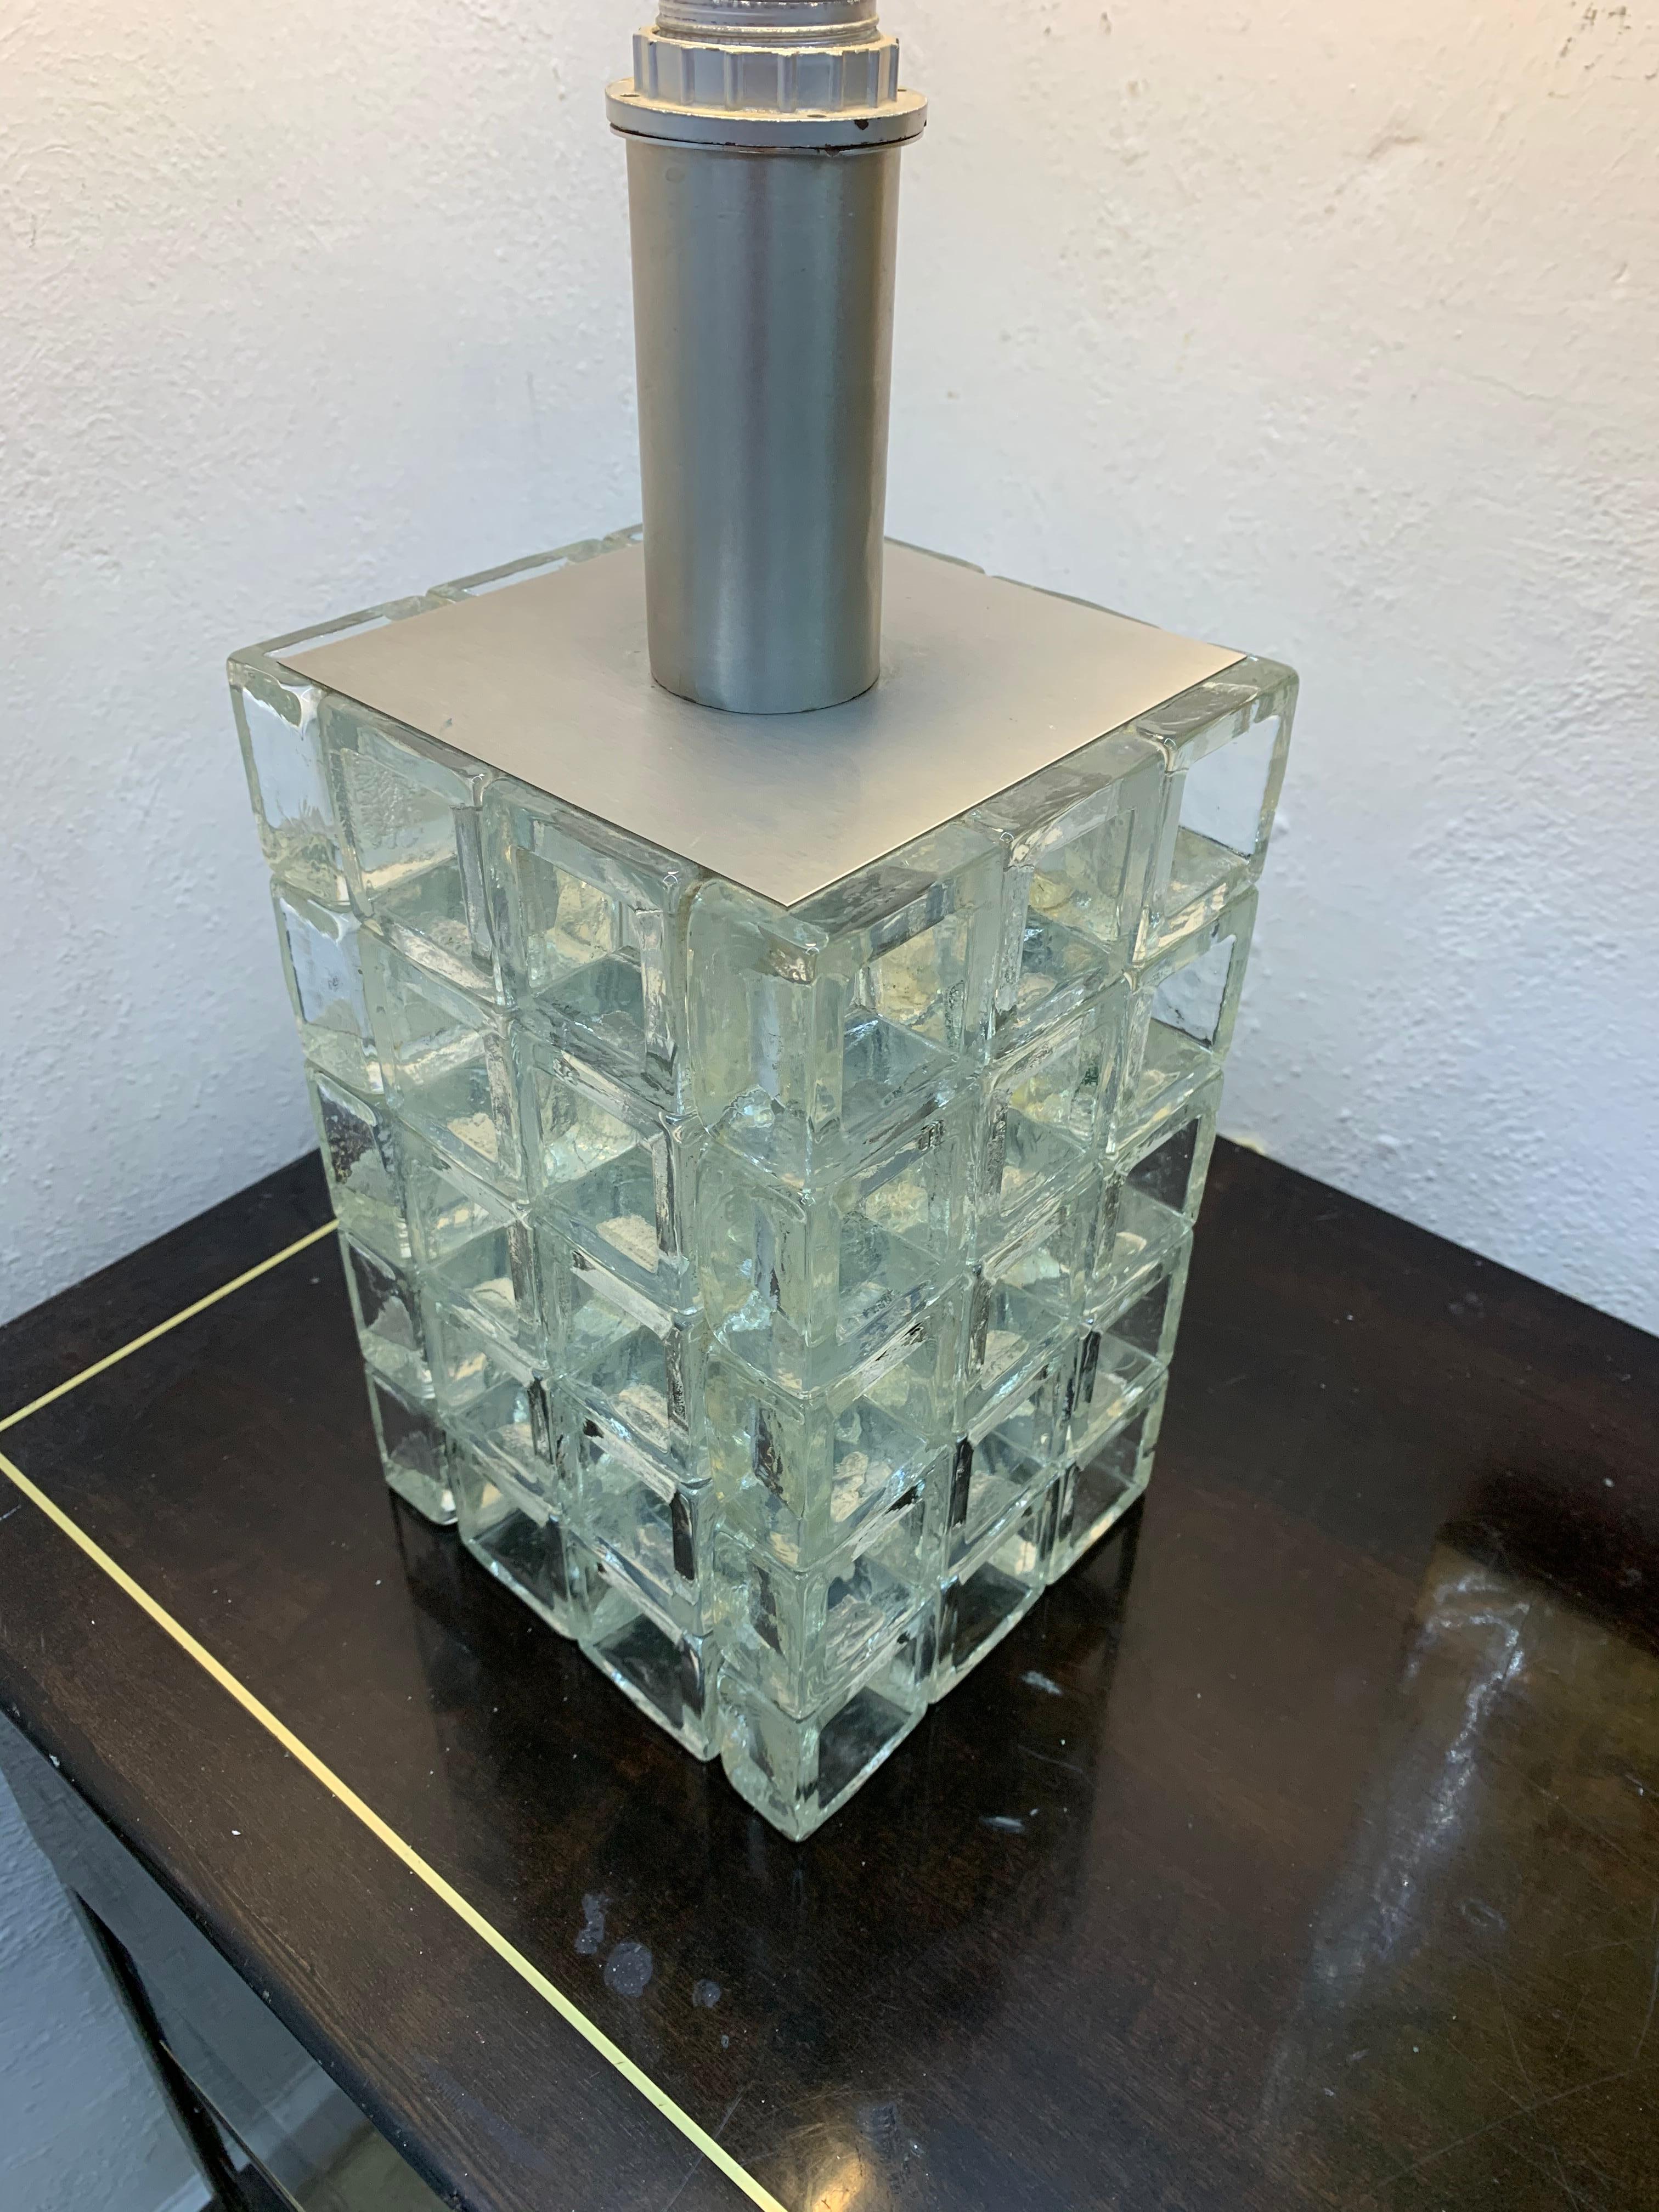 Mid-Century Modern table lamp, designed by Albano Poli for Poliarte glass in Murano glass.
Italy, circa 1960s.
Measurements of the glass body (not including the bulb holder) are:
Measures: 27cm H x 18cm W x 18cm D
The lamp is sold without a